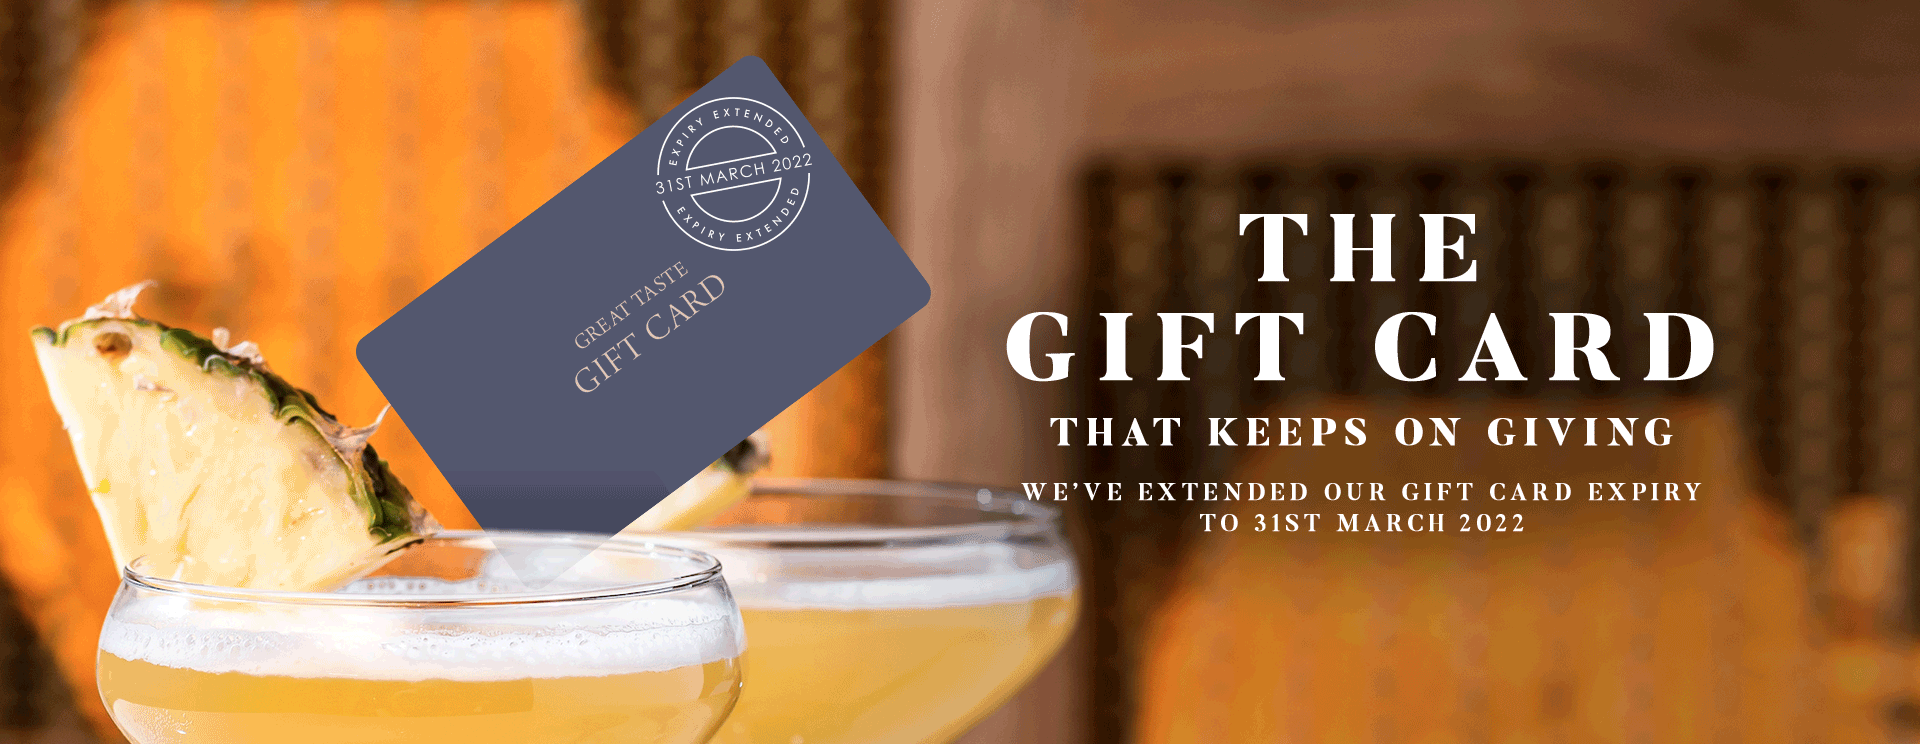 Give the gift of a gift card at The Old Bulls Head